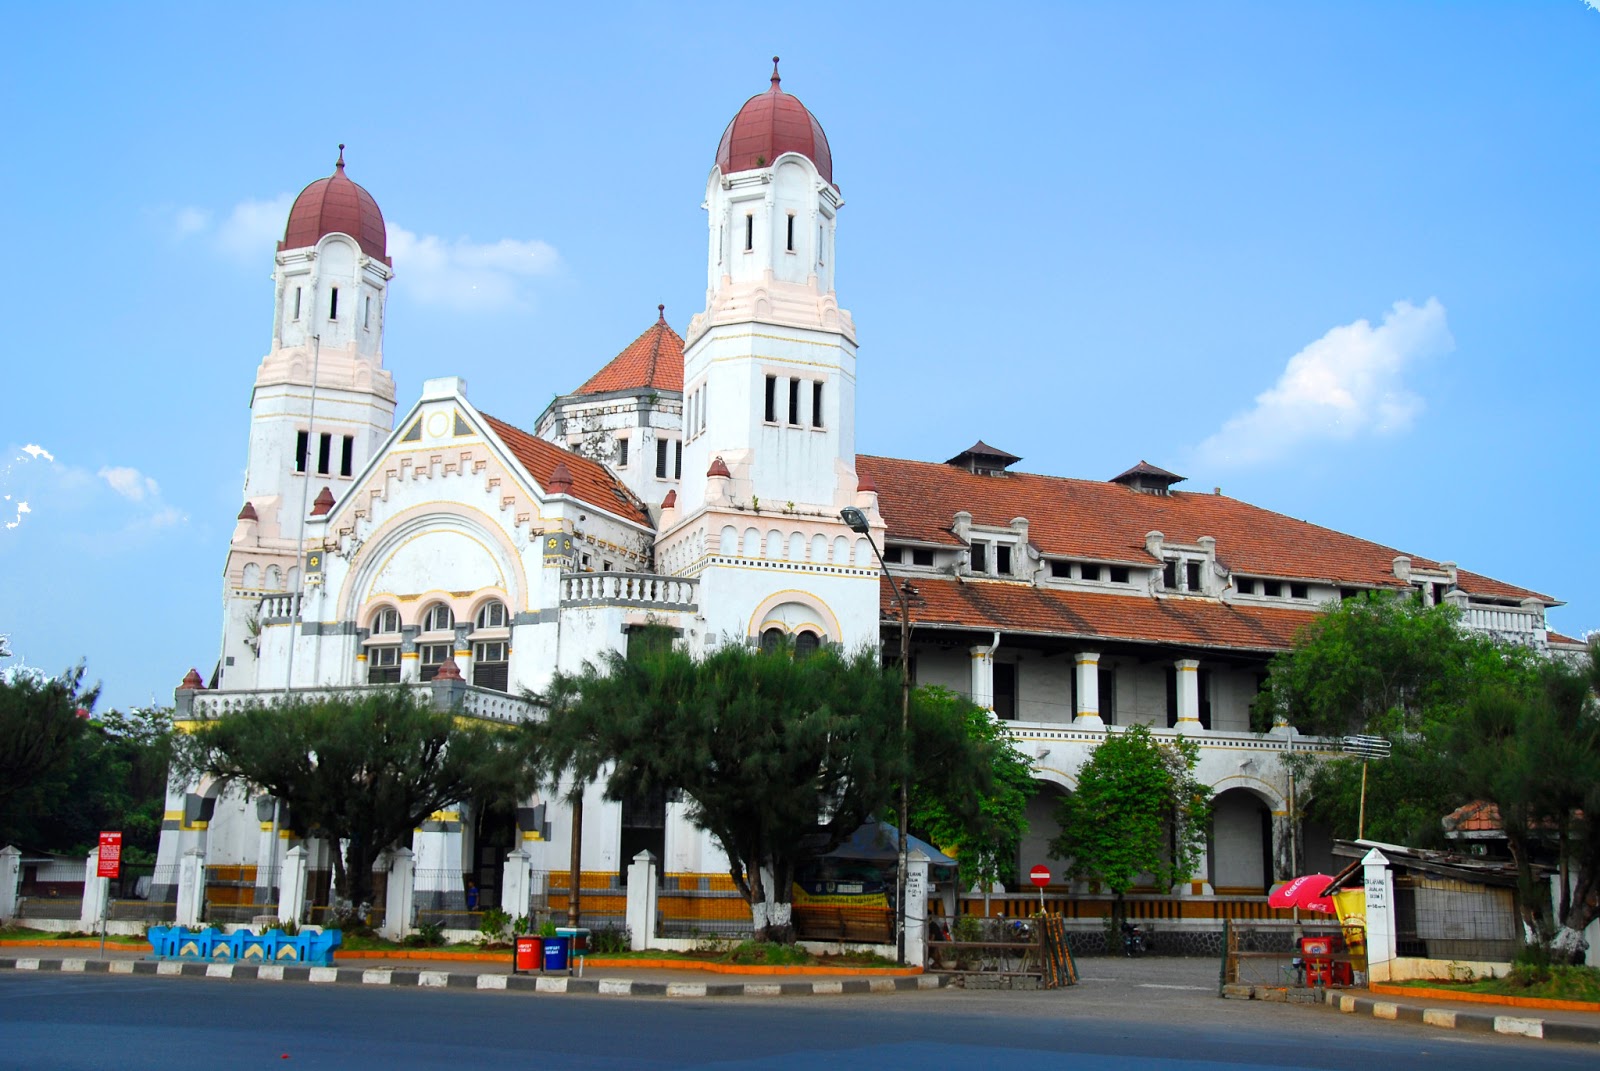  The image shows Lawang Sewu, a former colonial office building in Semarang, Indonesia, which is now a museum and a popular tourist attraction.